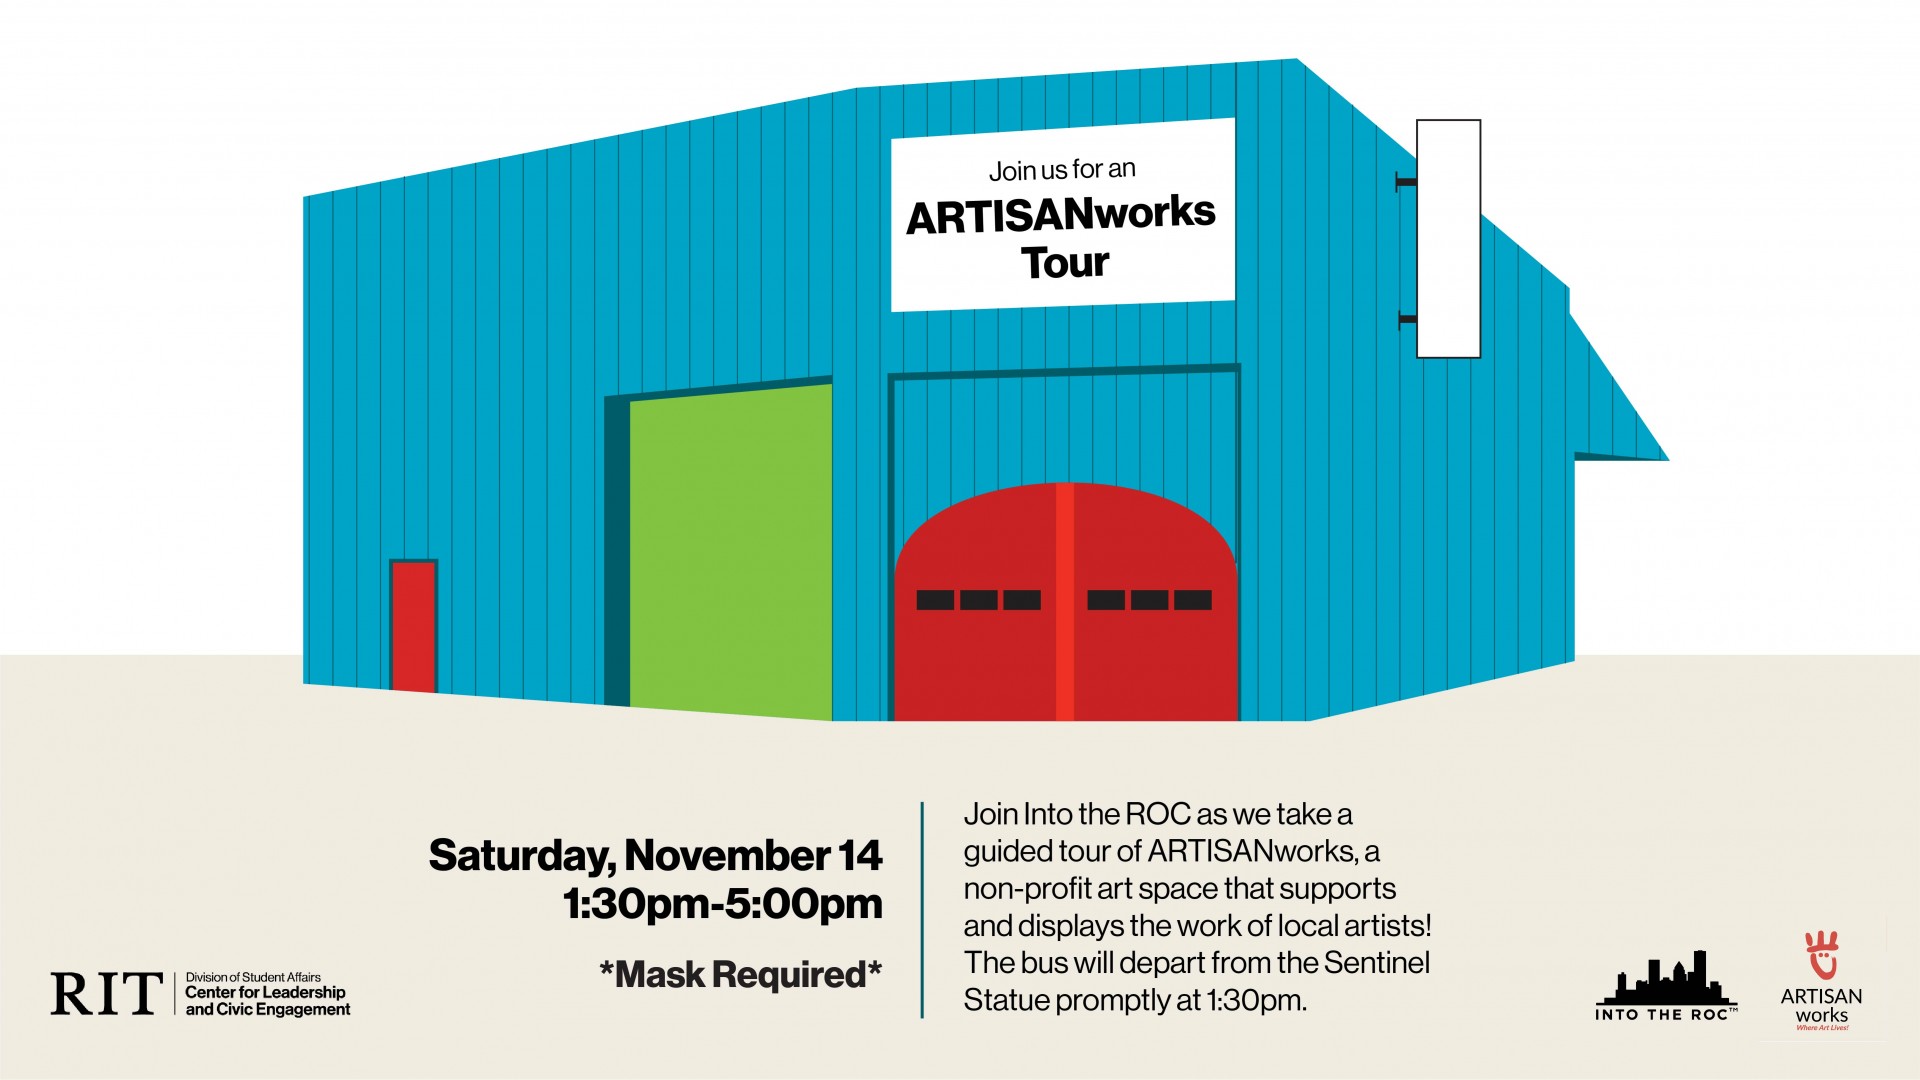 A caricature of the ARTISANworks building stands above the information for the event.